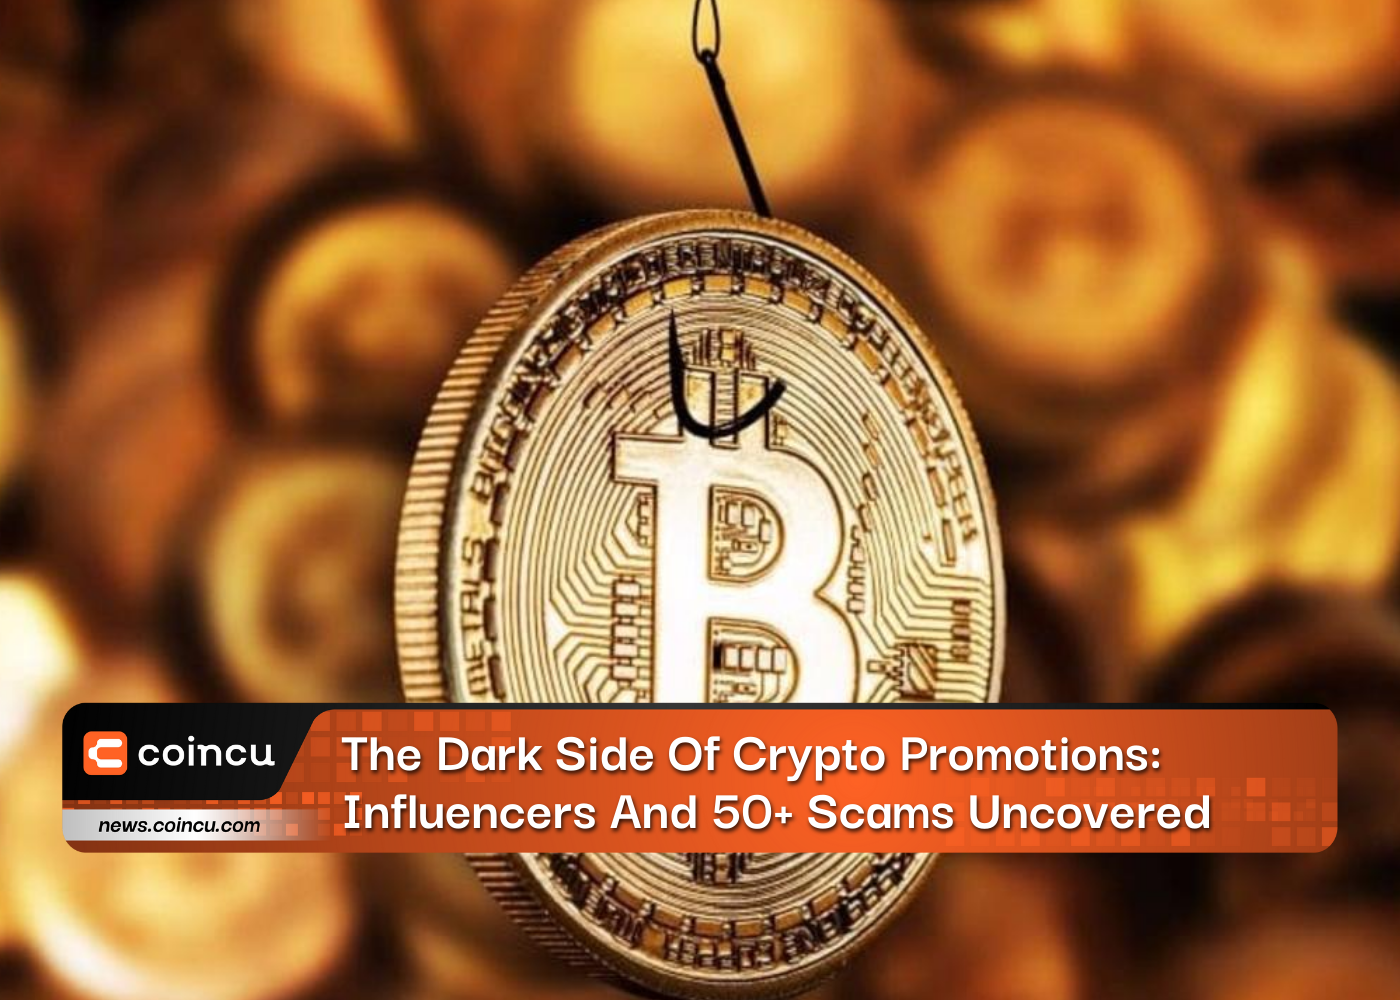 The Dark Side Of Crypto Promotions: Influencers And 50+ Scams Uncovered